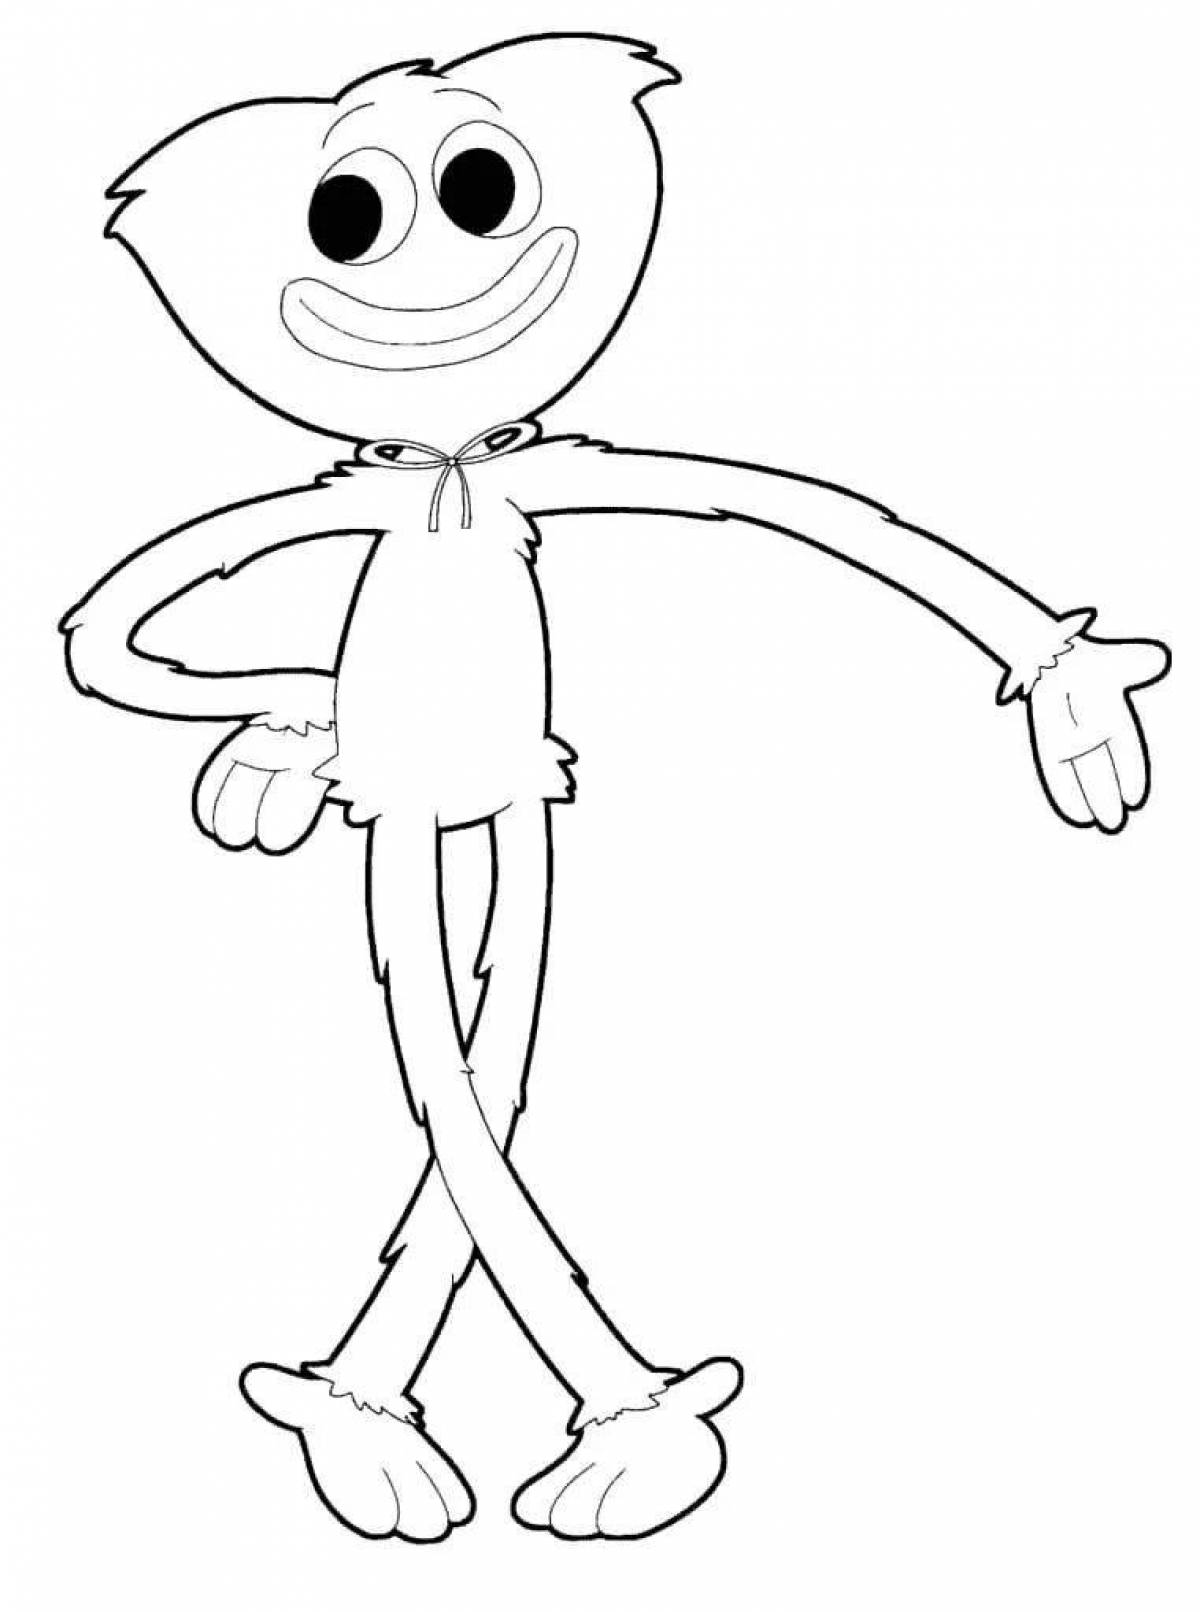 Coloring page funny mommy with long legs